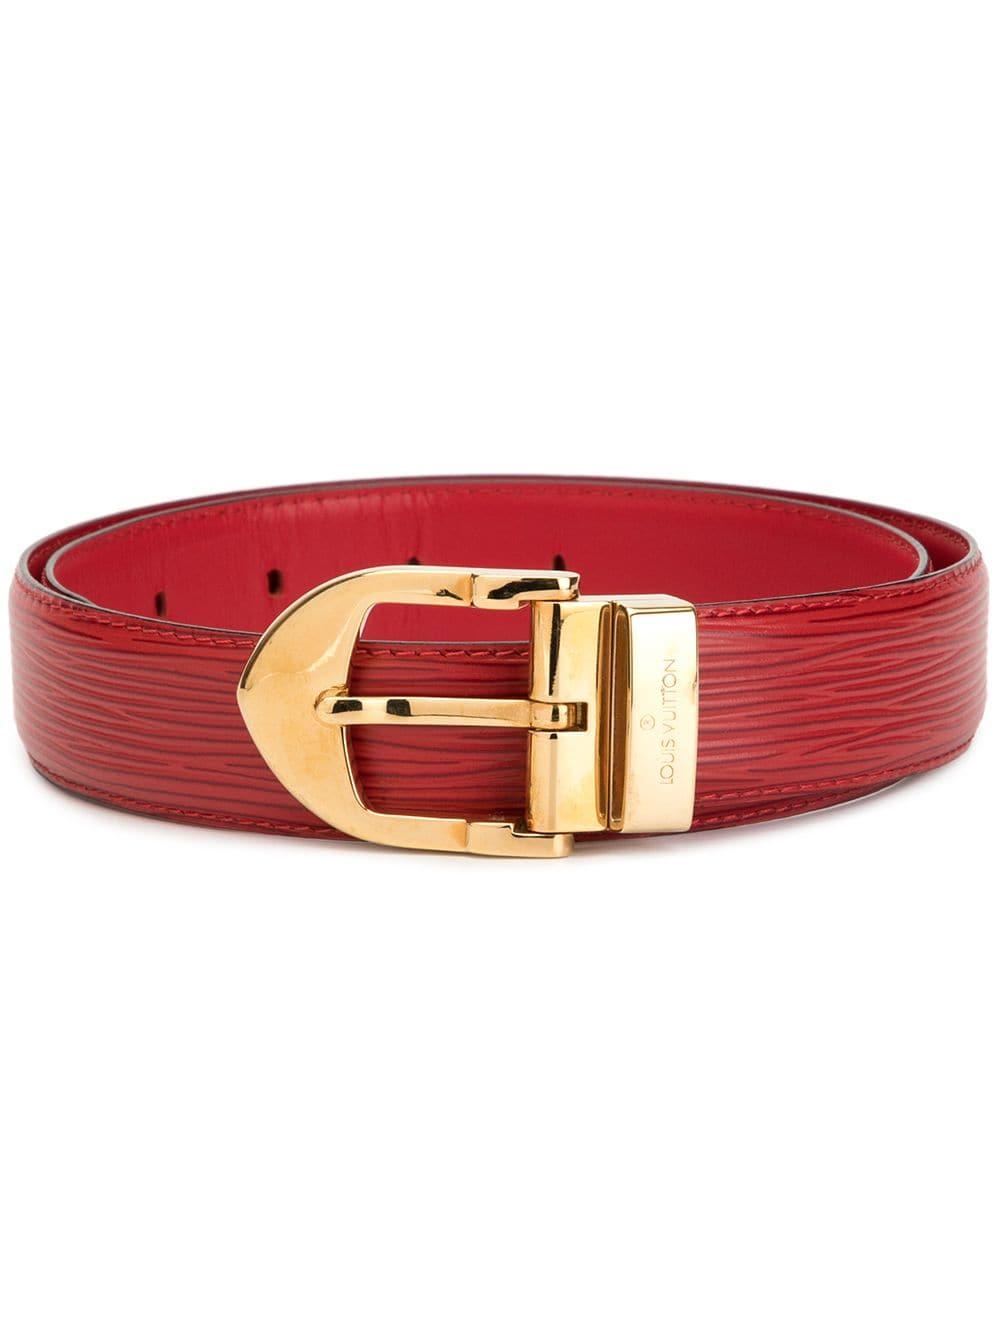 Louis Vuitton Leather Pre-owned Ceinture Buckle Belt in Red - Lyst